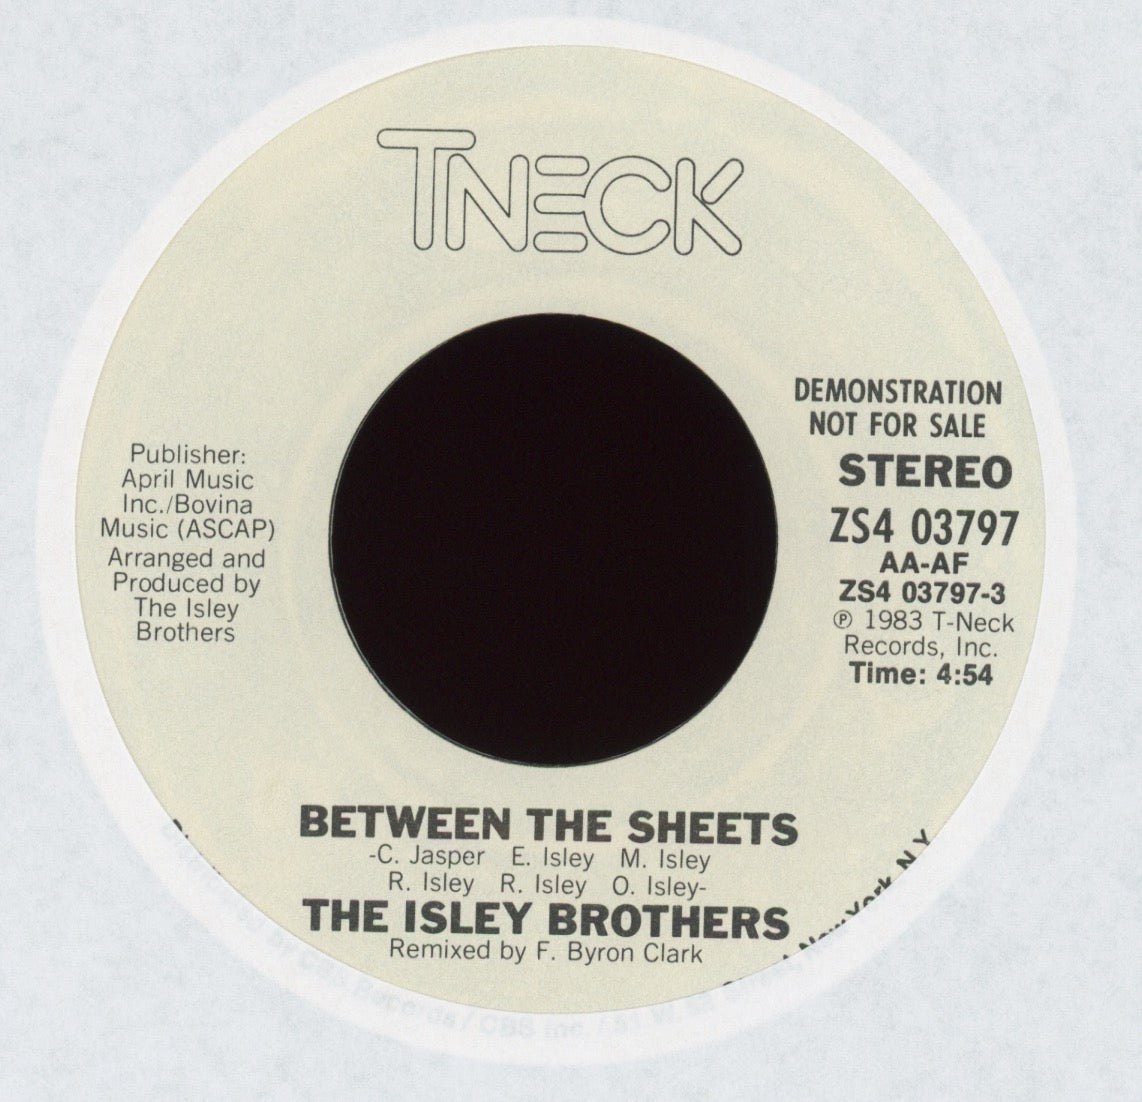 The Isley Brothers - Between The Sheets on T-Neck Promo